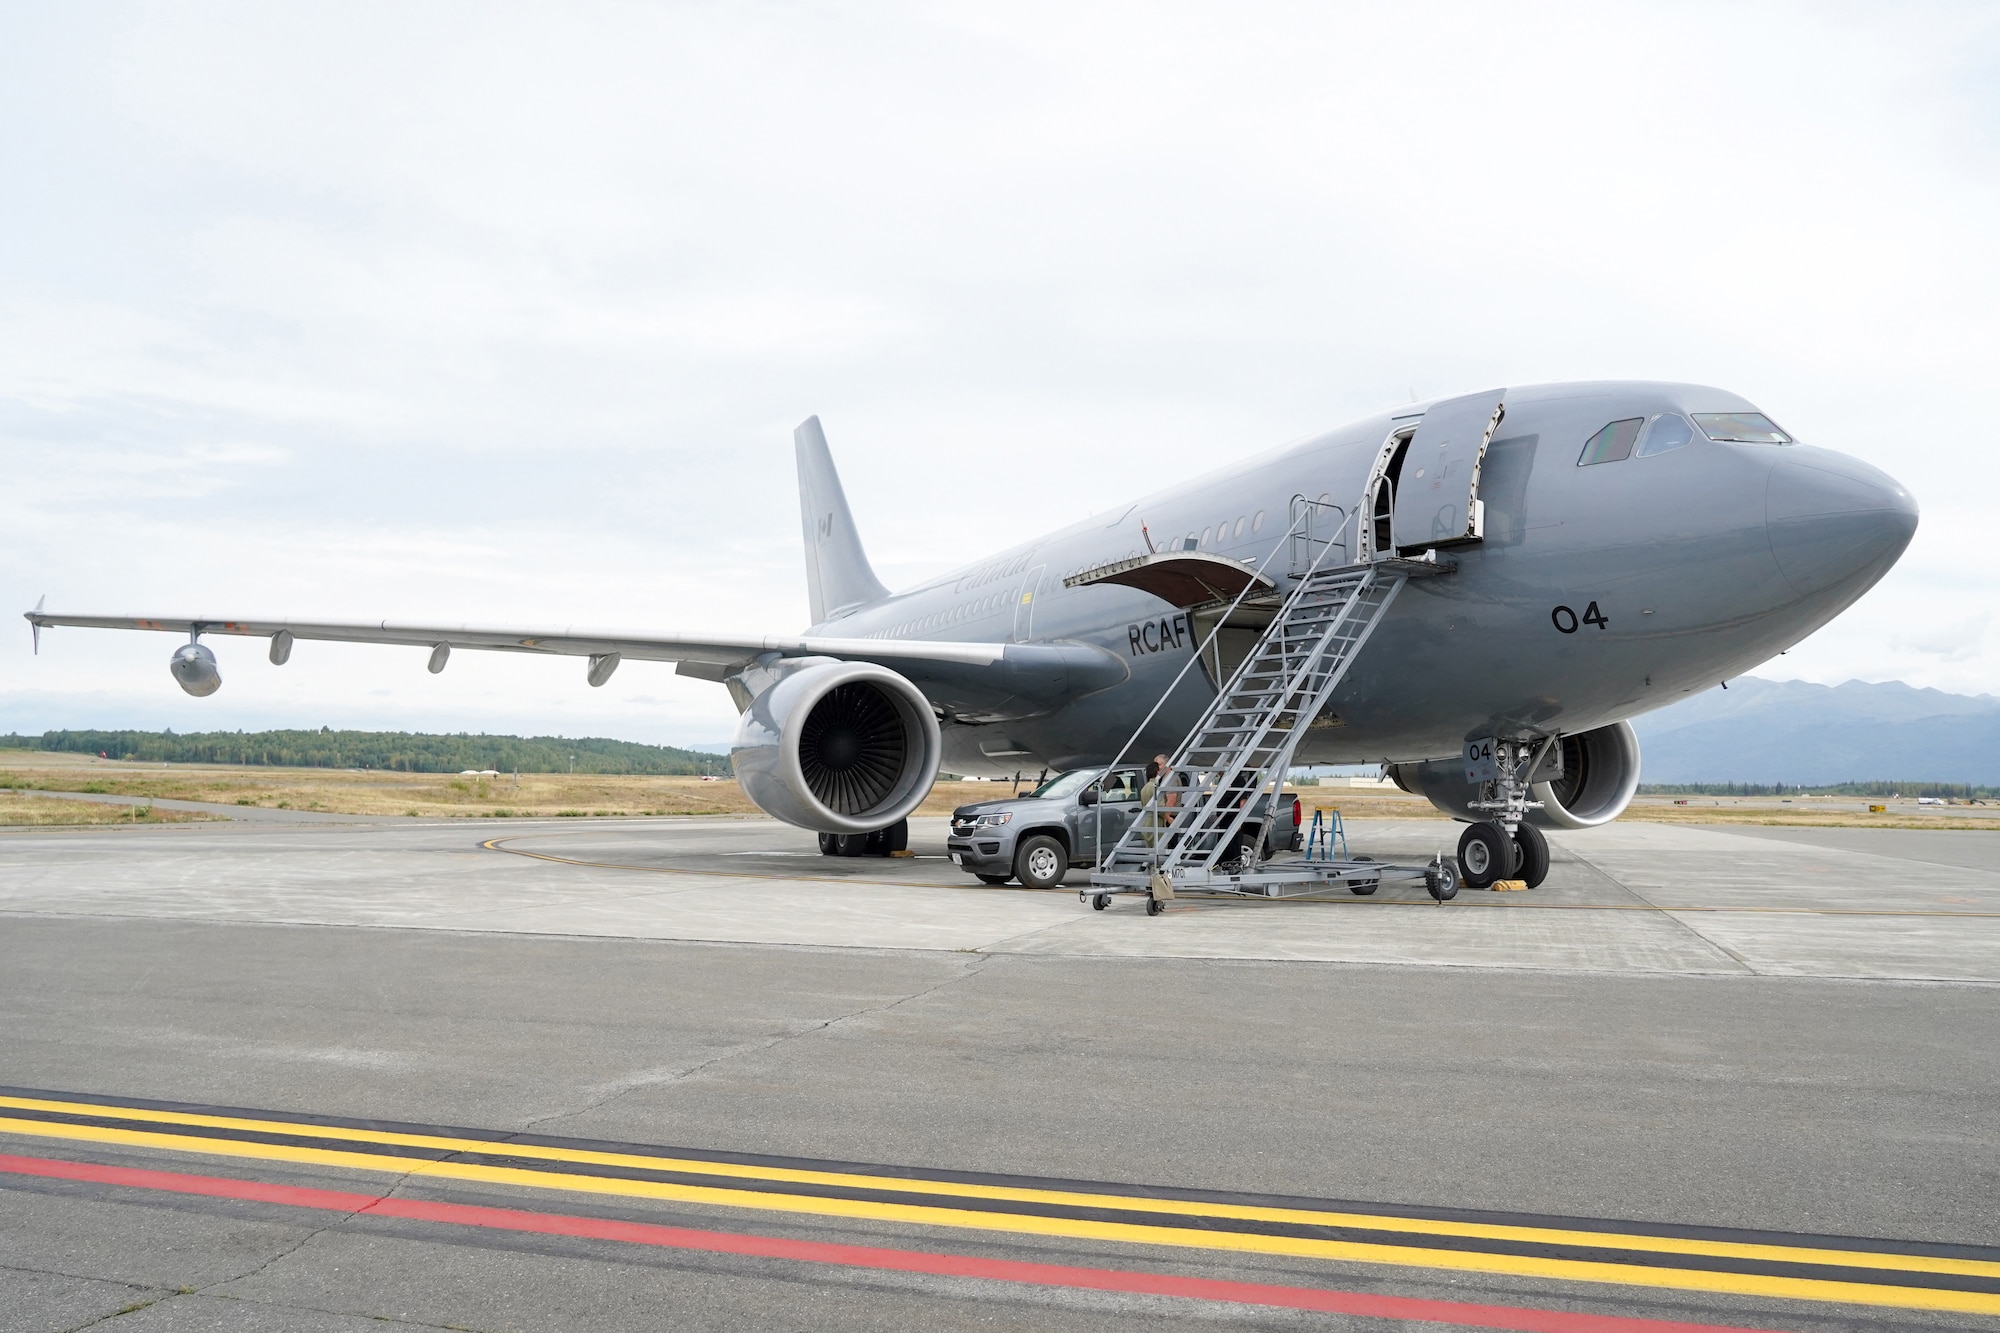 A Royal Canadian Air Force CC-150 Polaris refueling tanker of the 437th Transport Squadron based out of Canadian Forces Base Trenton, Canada, sits on the tarmac at Joint Base Elmendorf-Richardson, Alaska, before a sortie during the Red Flag-Alaska 19-3 exercise, Aug. 15, 2019. Red Flag-Alaska, a series of Pacific Air Forces commander-directed field training exercises for U.S. forces, provides joint offensive counter-air, interdiction, close air support, and large force employment training in a simulated combat environment.